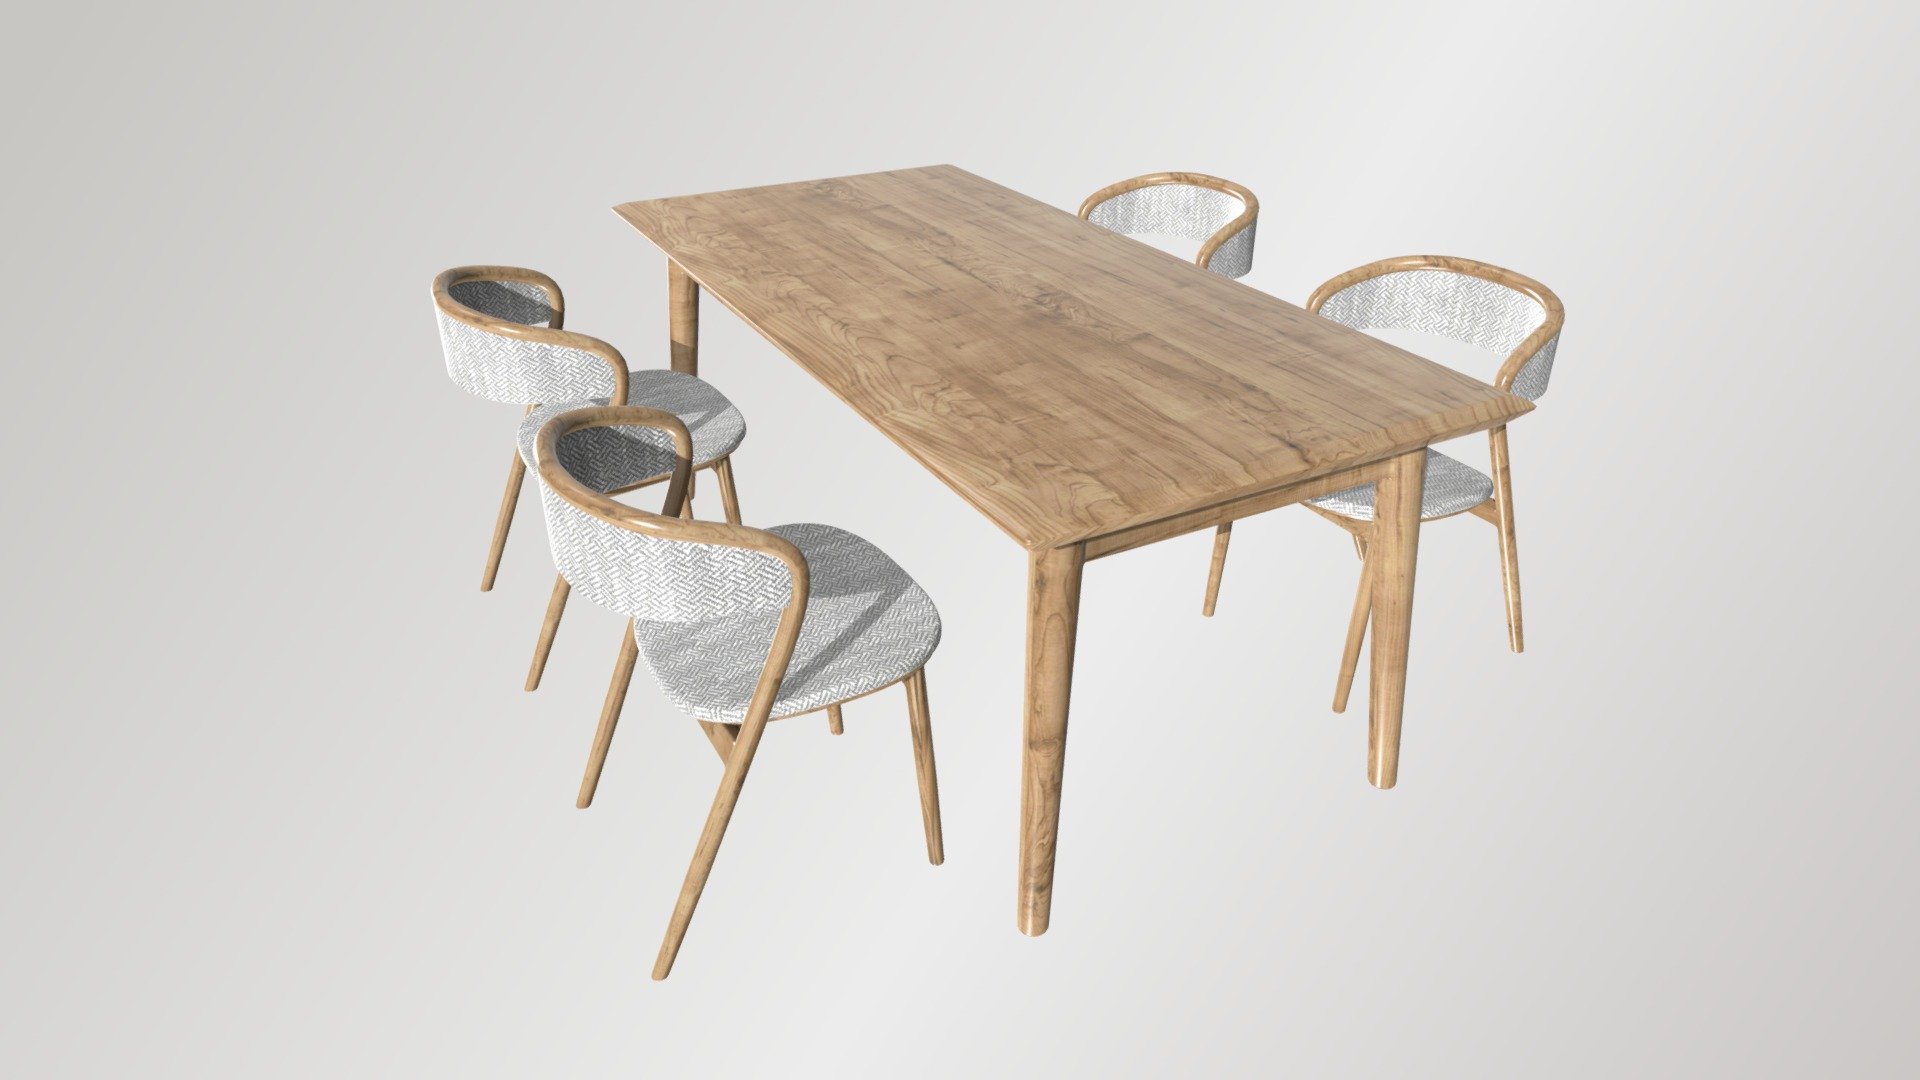 Modern Dining Table Set with unique design

Low-poly Triangles count:




Whole set: 28,348

Table: 972

Chair: 6,844

Ready for Virtual Reality (VR), Augmented Reality (AR), metaverses, 3D tours, games and other real-time apps, as well as for advertising and commercial, etc.




Pivot Point x0, y0, z0

Clean UV

Game-ready

Real-world size

Clear naming

Fully textured with all materials applied

PBR

Textures:




All materials and textures are included in the Textures folders

Textures in 4k, 2k, 1k

1k, 2k textures: Albedo, Roughness, Metallic, ORM in JPEG; Normal in PNG

4k textures: all in PNG

Normal map - OpenGL

Formats:




FBX with packed textures

OBJ + MTL

GLB + USDZ

blend with 4k textures for FBX and OBJ

blend with 2k textures for GLB

If you experience any difficulties while using the models, we will be more than happy to offer our qualified assistance.

Thank you for choosing our 3D models!

Sincerely yours,

CyberFox team - Dining Table Set - Buy Royalty Free 3D model by CyberFox 3D Studio (@cyberfox3d) 3d model